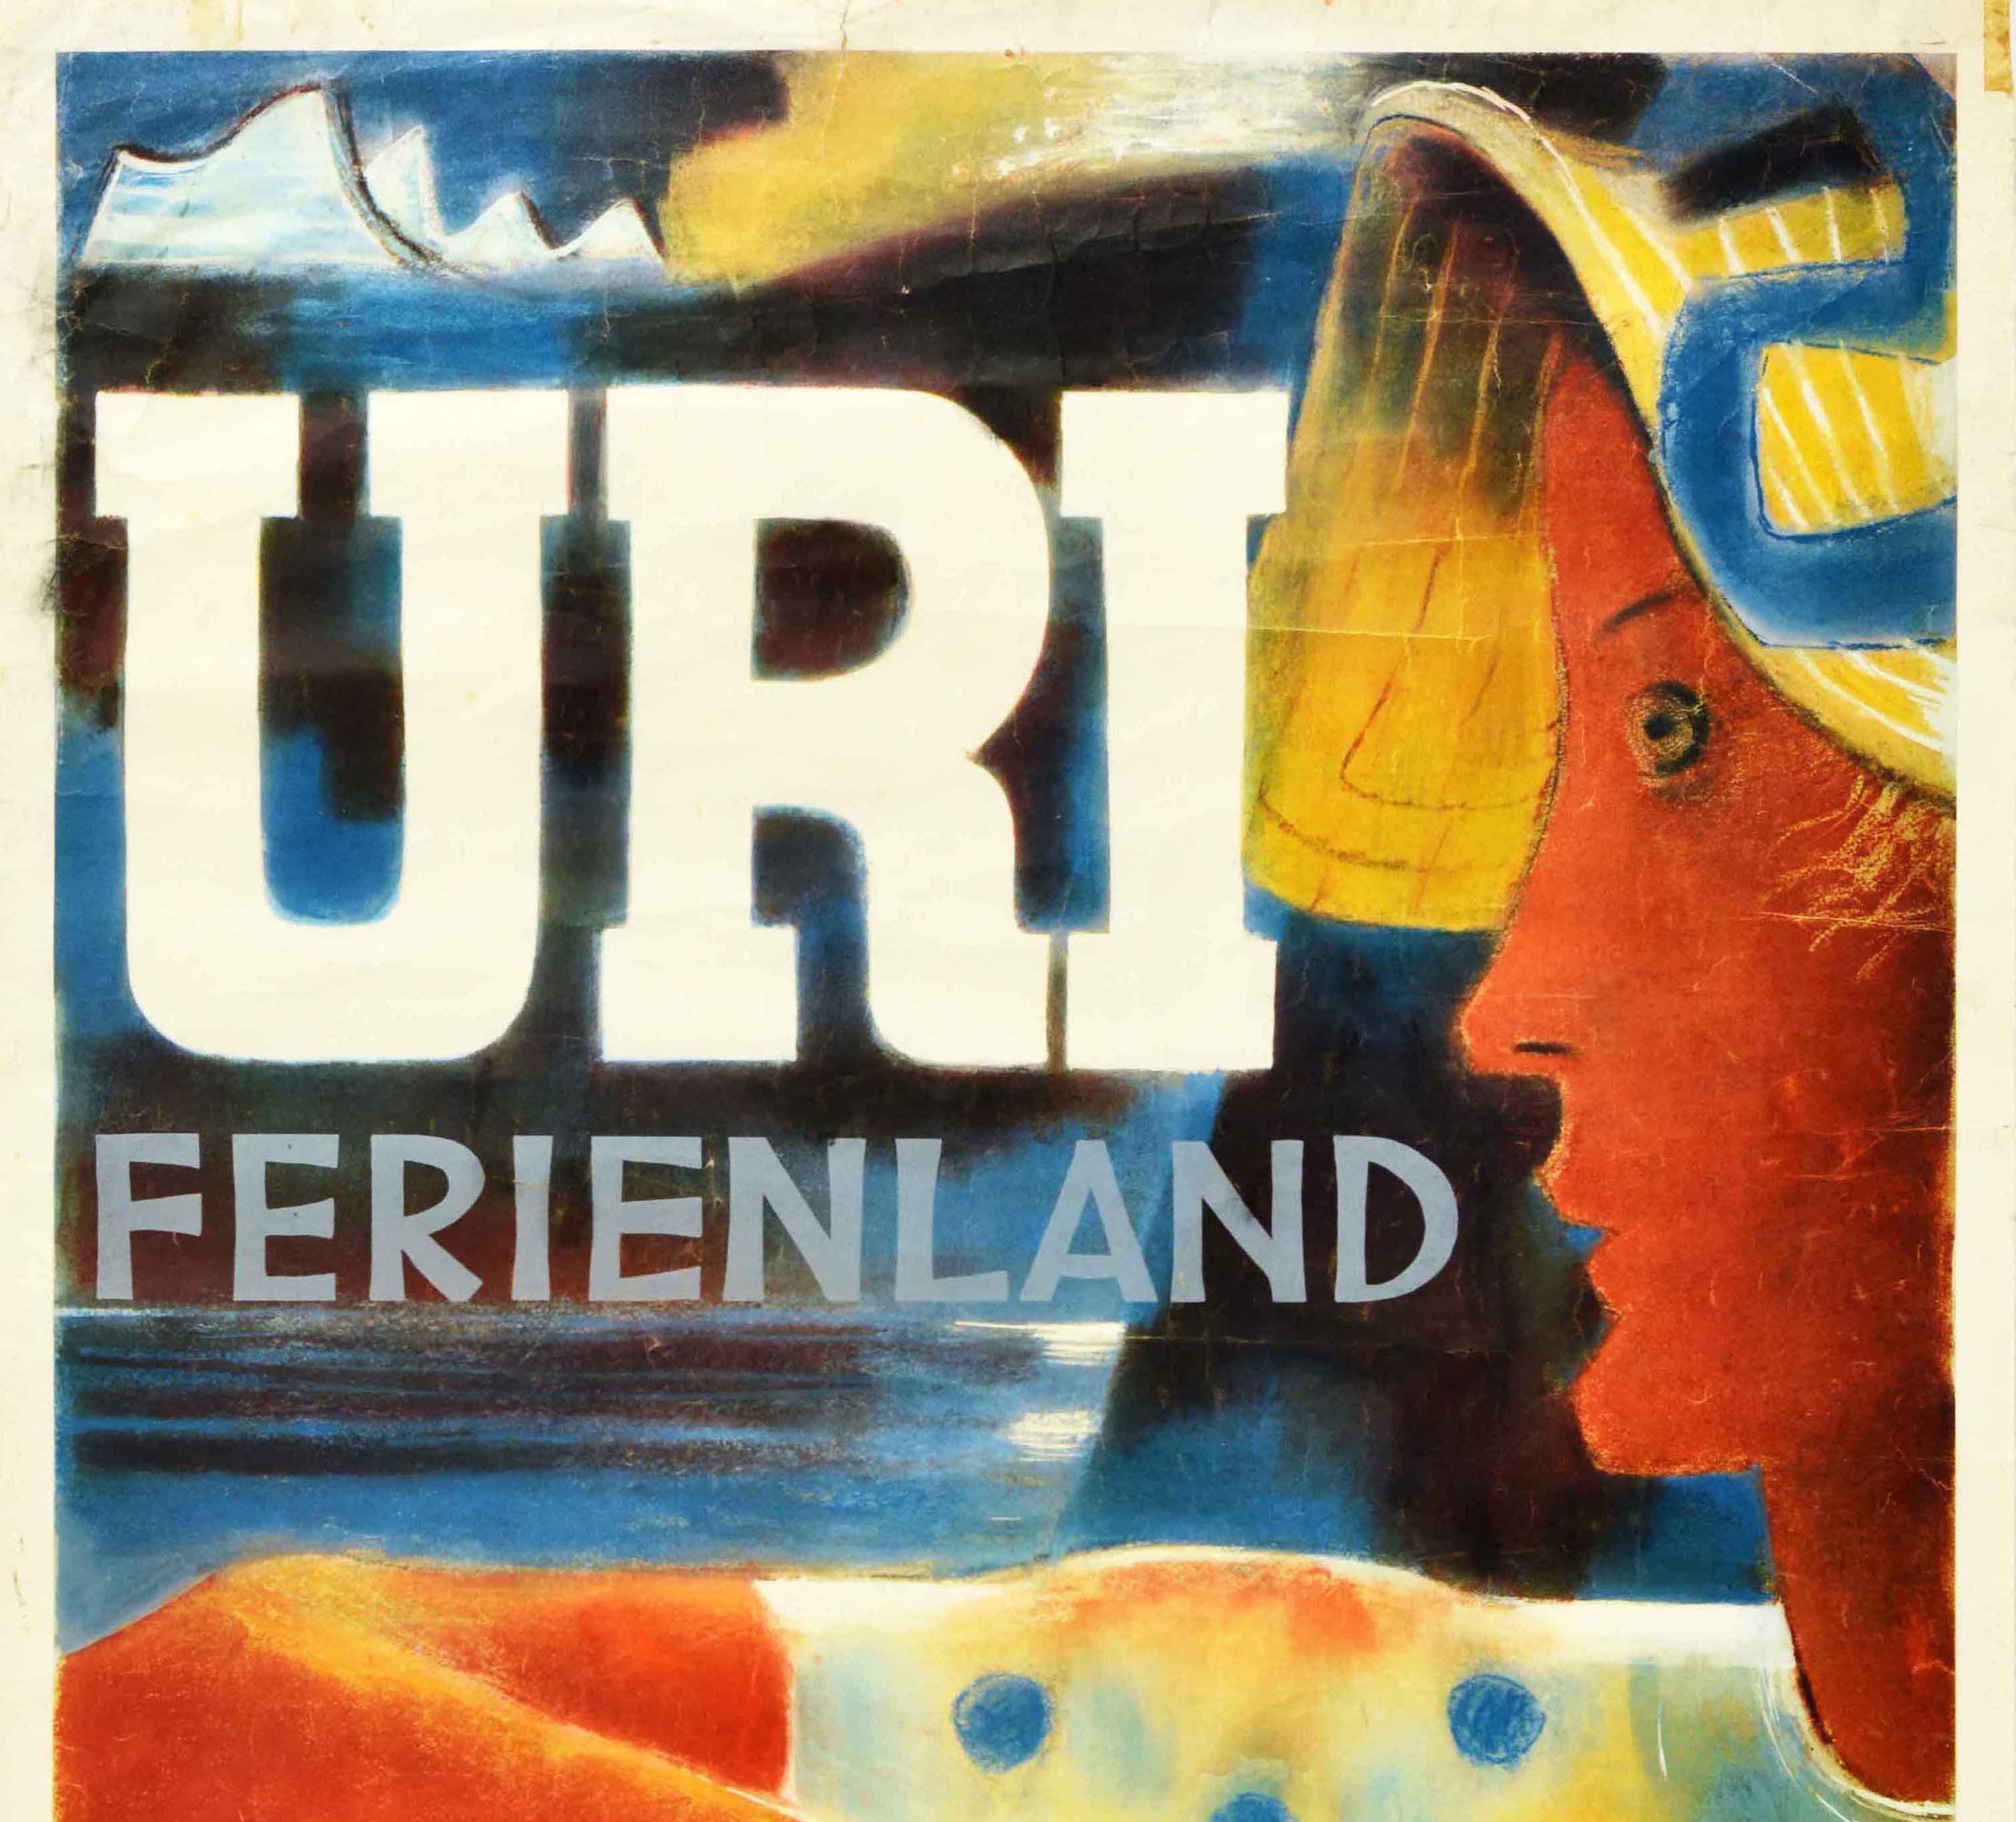 Original vintage travel poster for Uri Ferienland / Holiday Land featuring artwork by Heinrich Danioth (1896-1953) depicting a lady wearing a sun hat and holding a Swiss flag while leaning on a decorative fence with a view over a lake towards snow